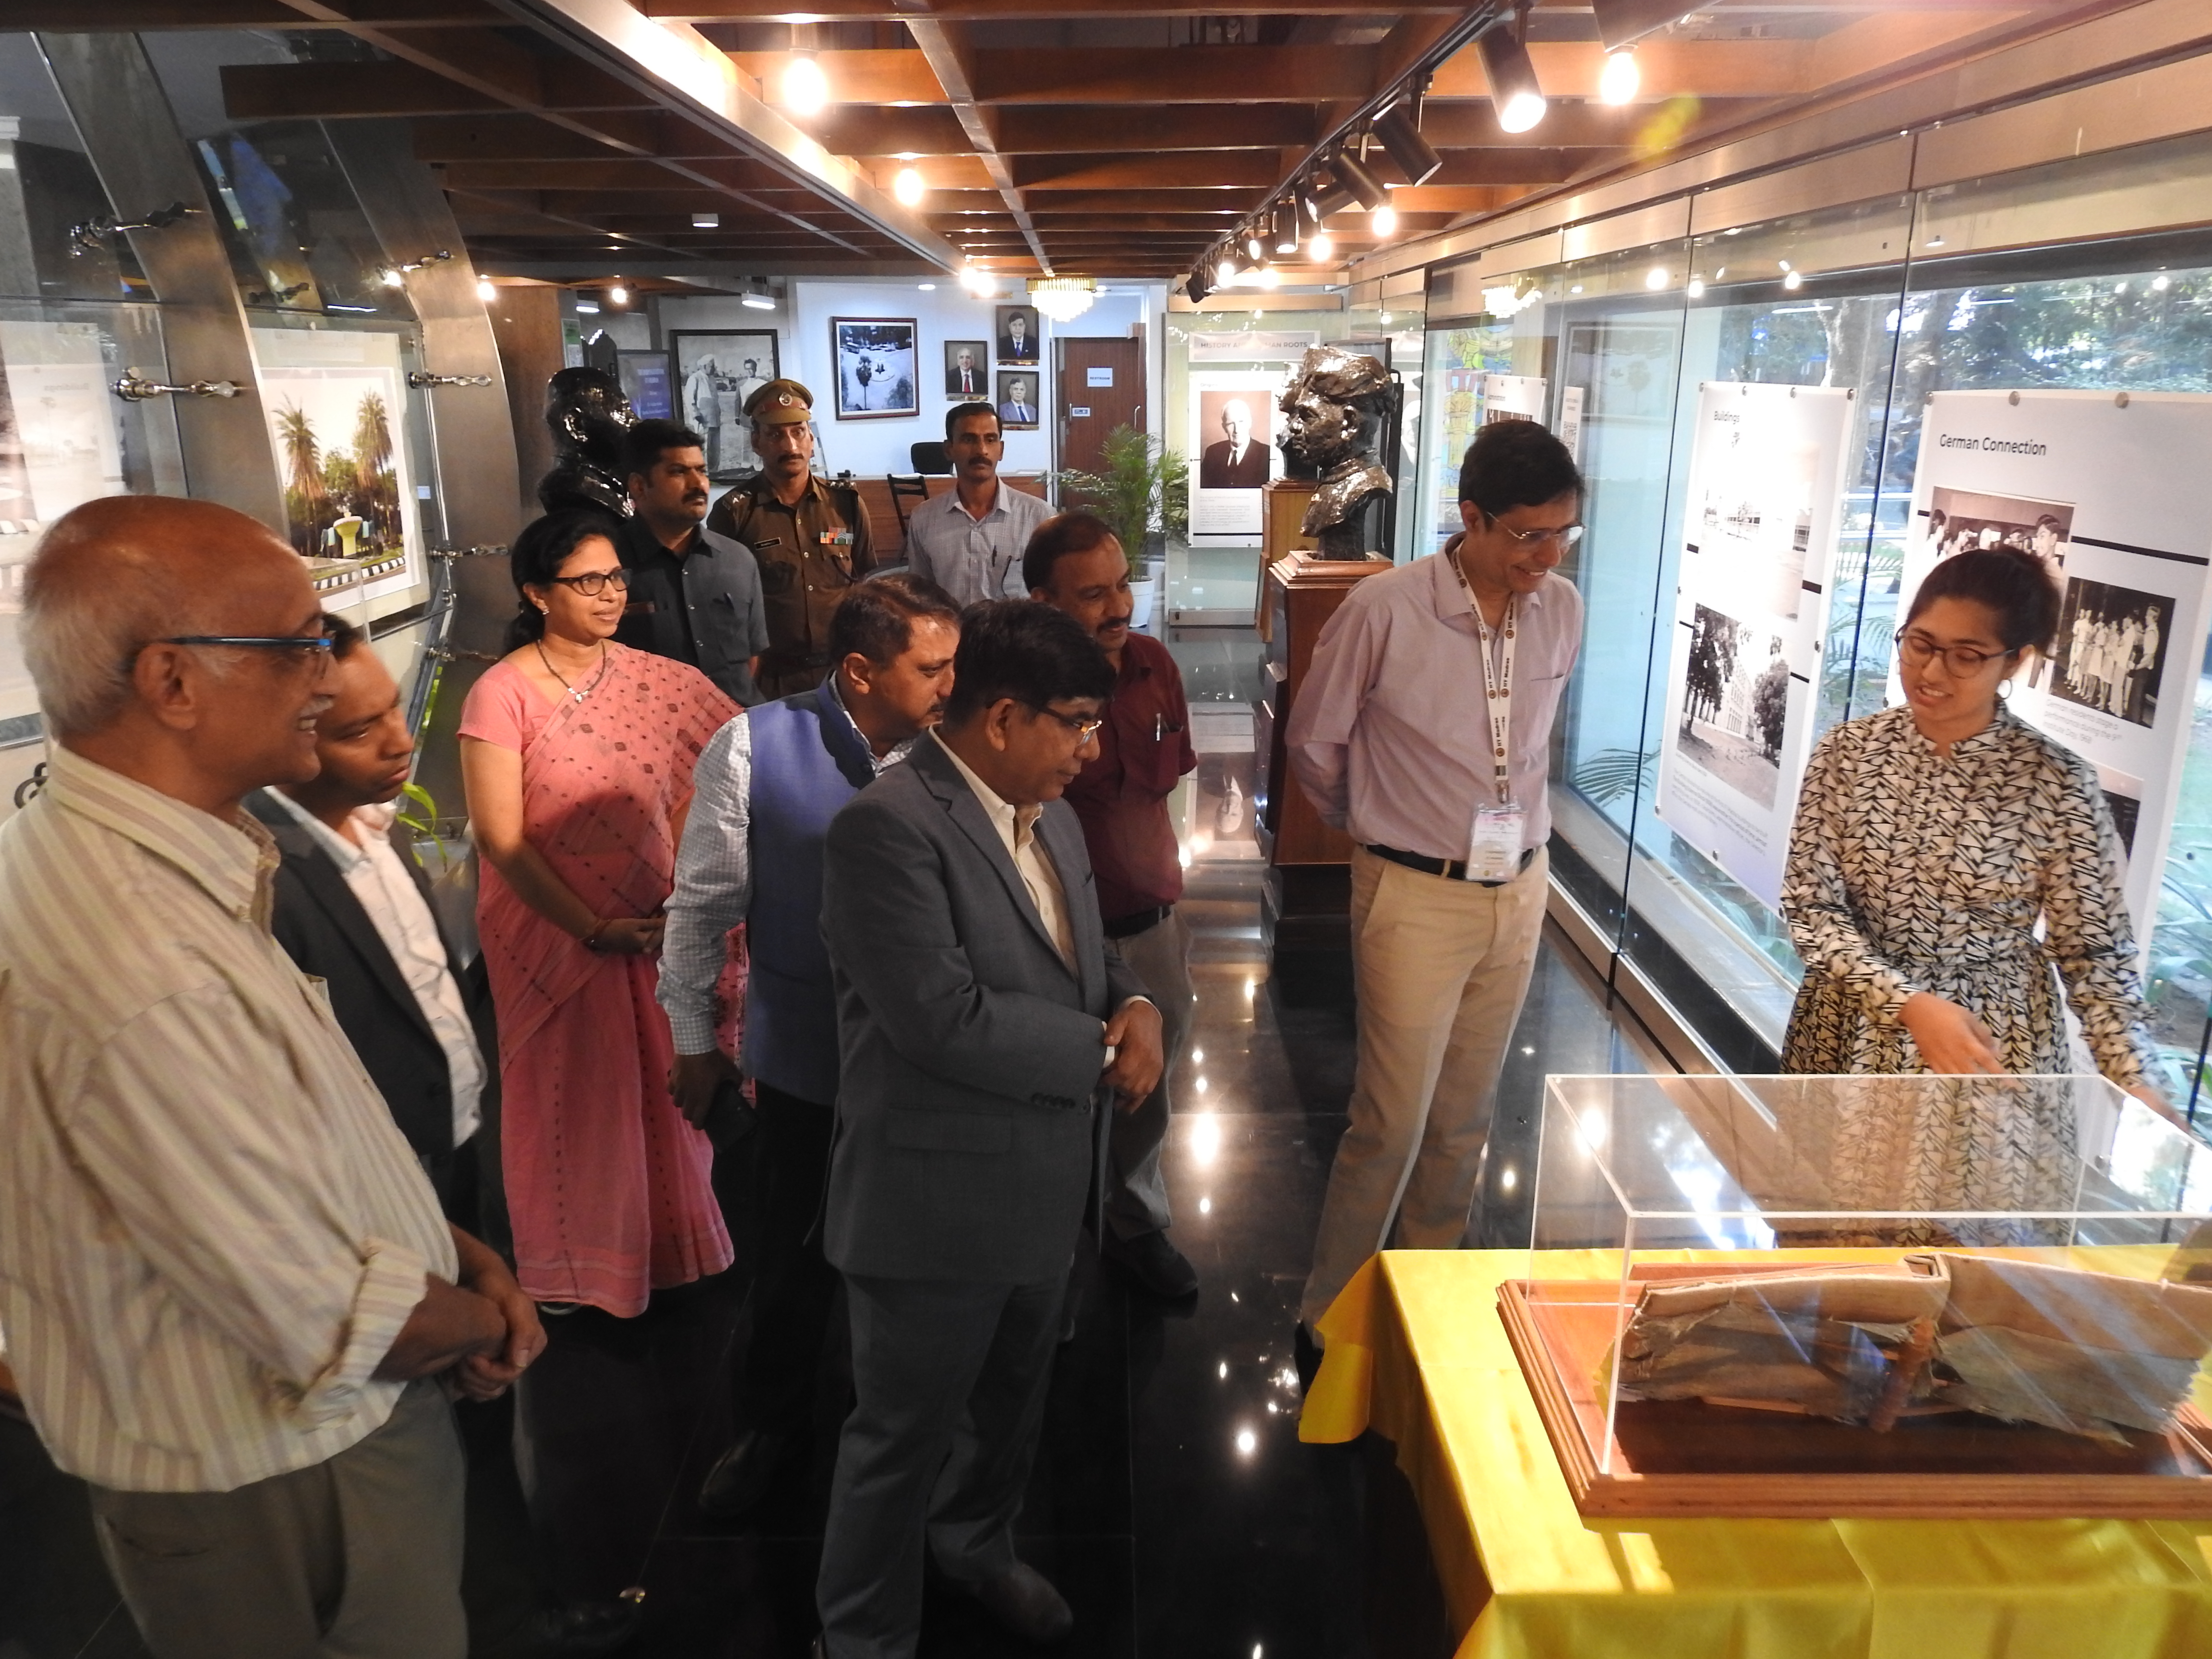 Ashlin Deena Mathews (Project Associate, Heritage Centre) shows Dr. Subhas Sarkar (Union Minister of State for Education) the Visitors' Book at the Heritage Centre